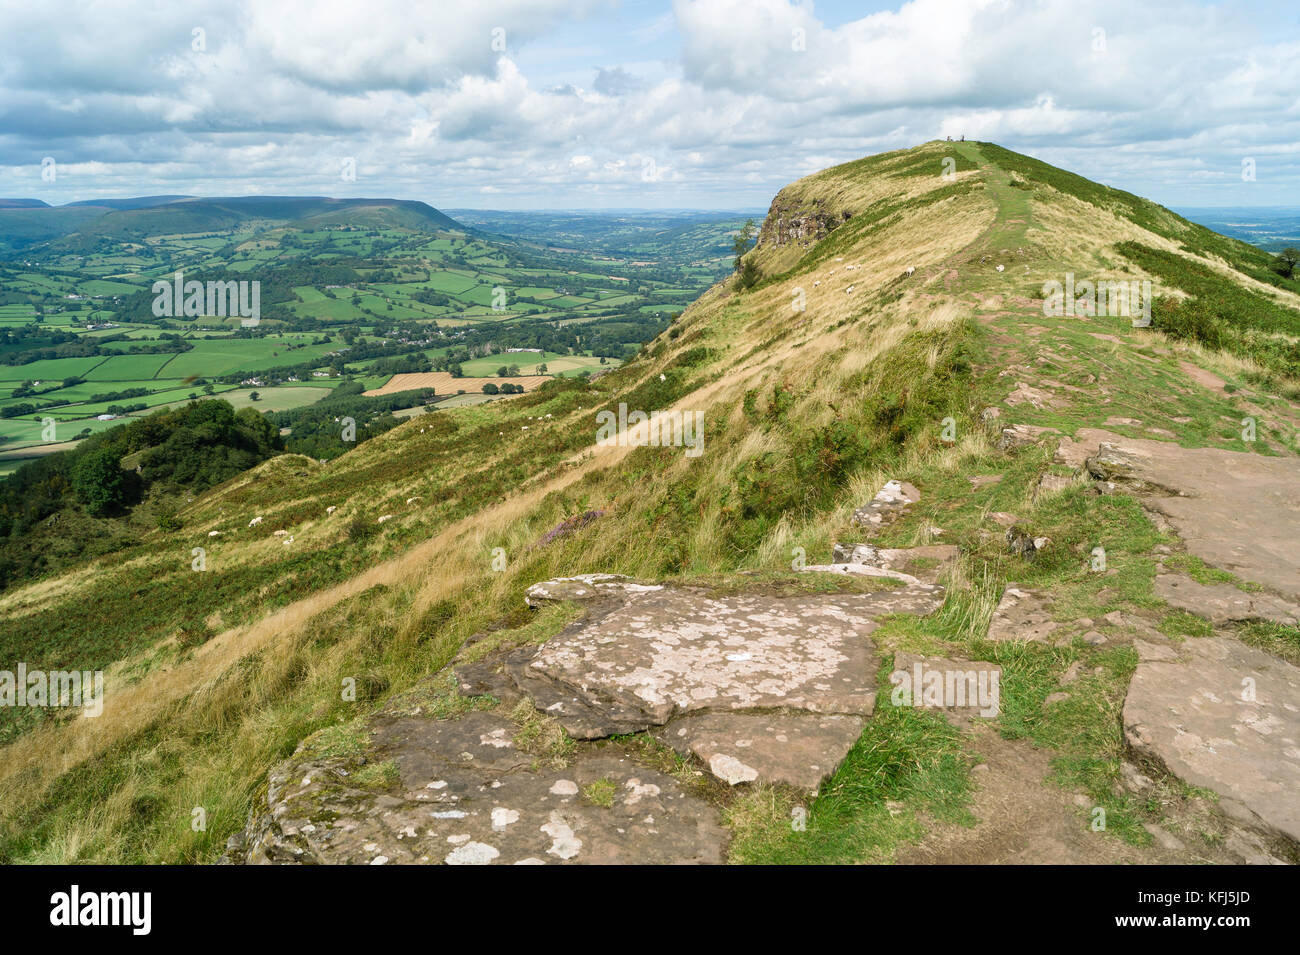 A view looking north towards the summit of Ysgyryd Fawr, known locally as 'The Skirrid Stock Photo